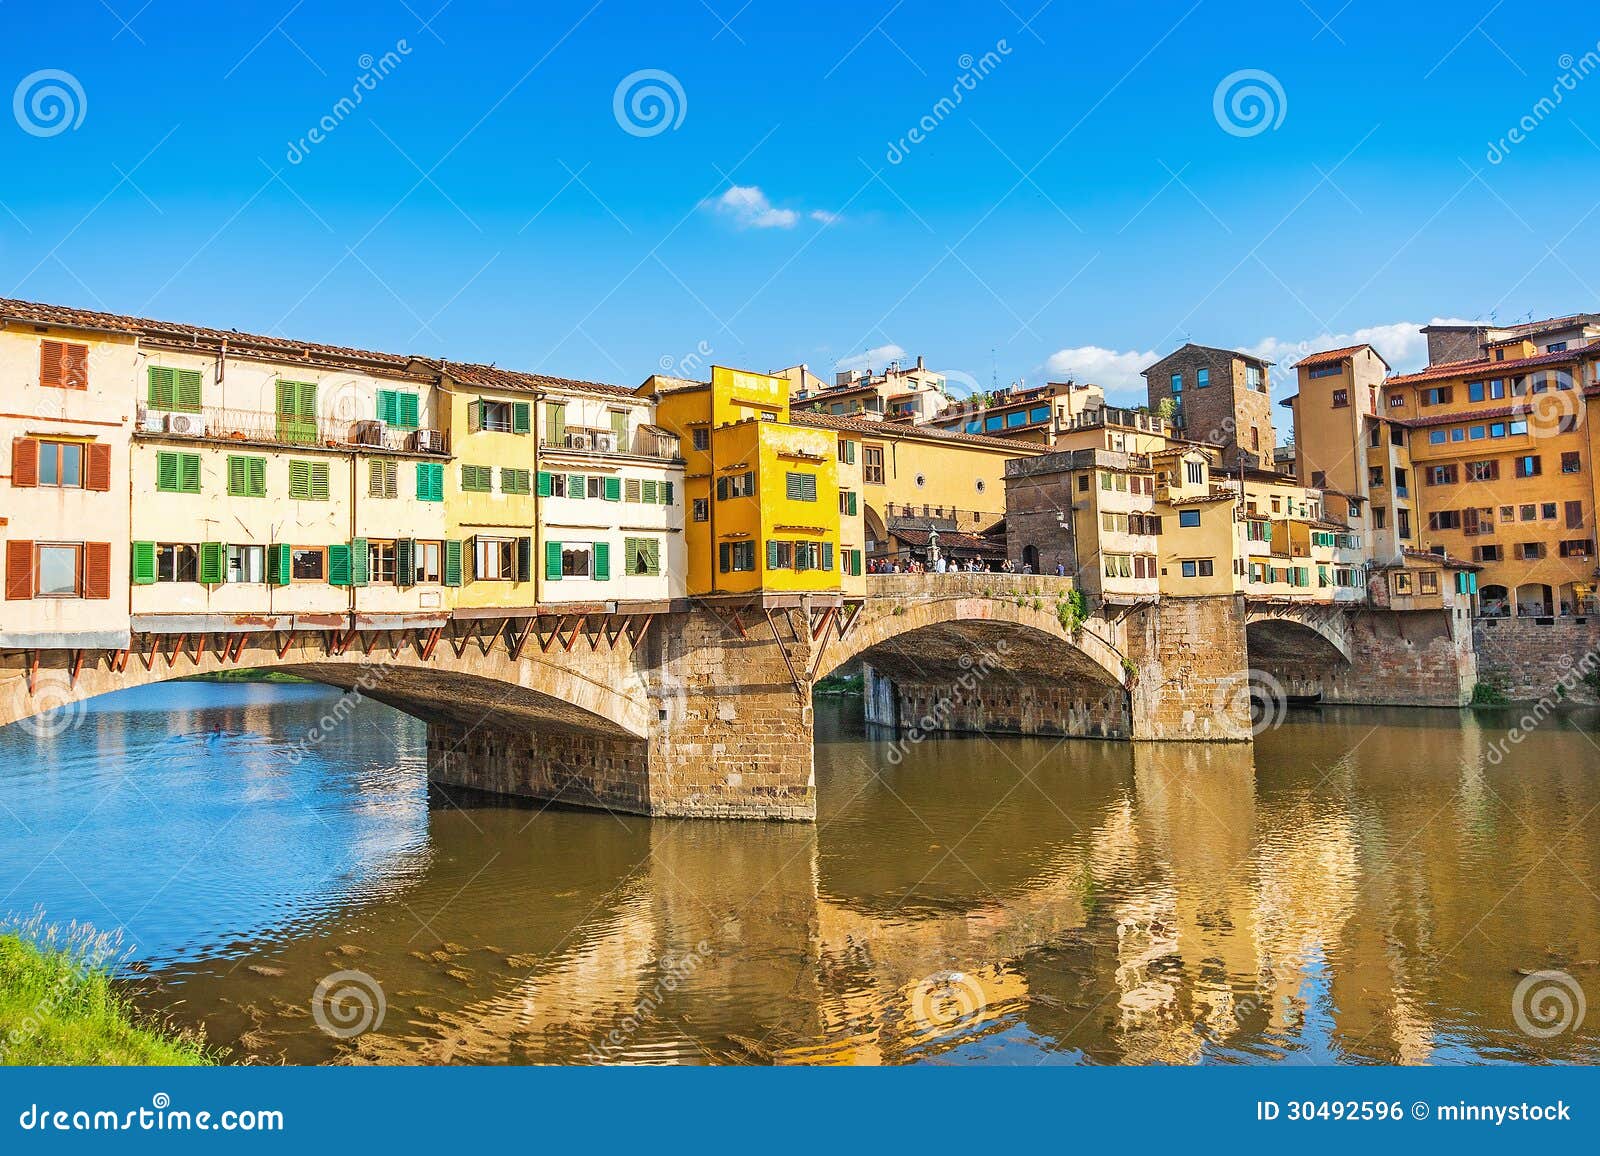 ponte vecchio at sunset in florence, italy